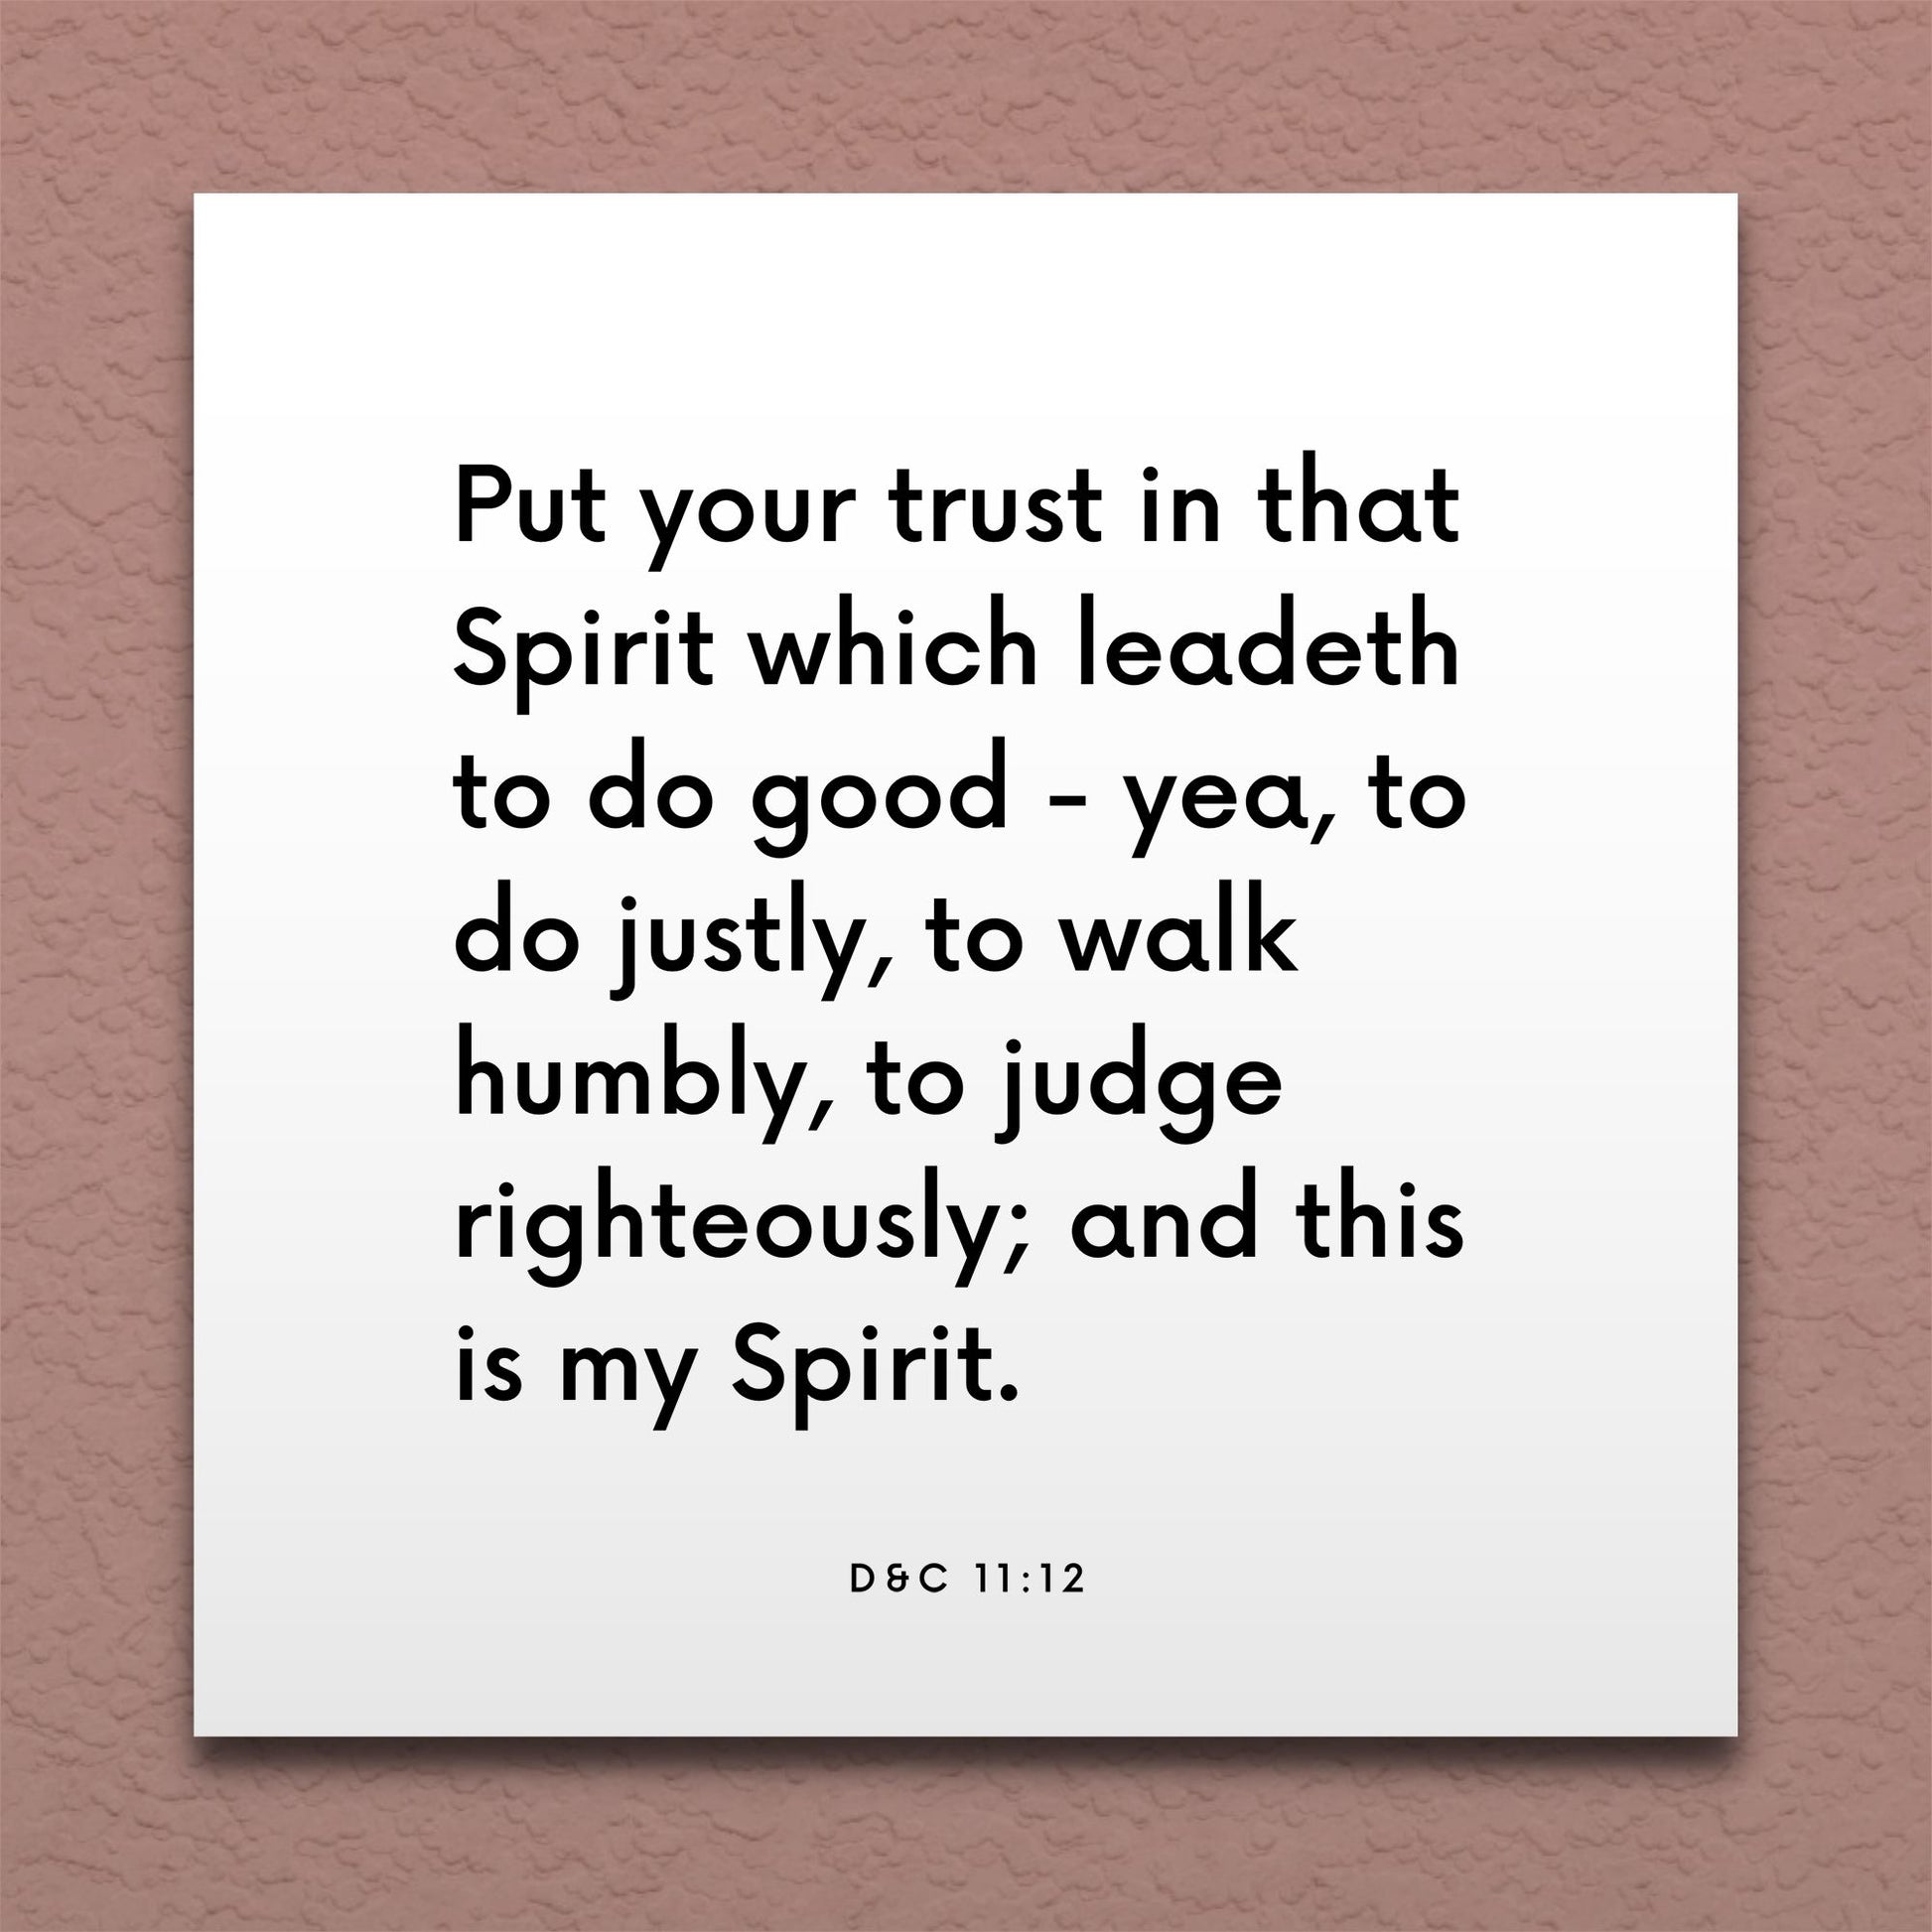 Wall-mounted scripture tile for D&C 11:12 - "Put your trust in that Spirit which leadeth to do good"